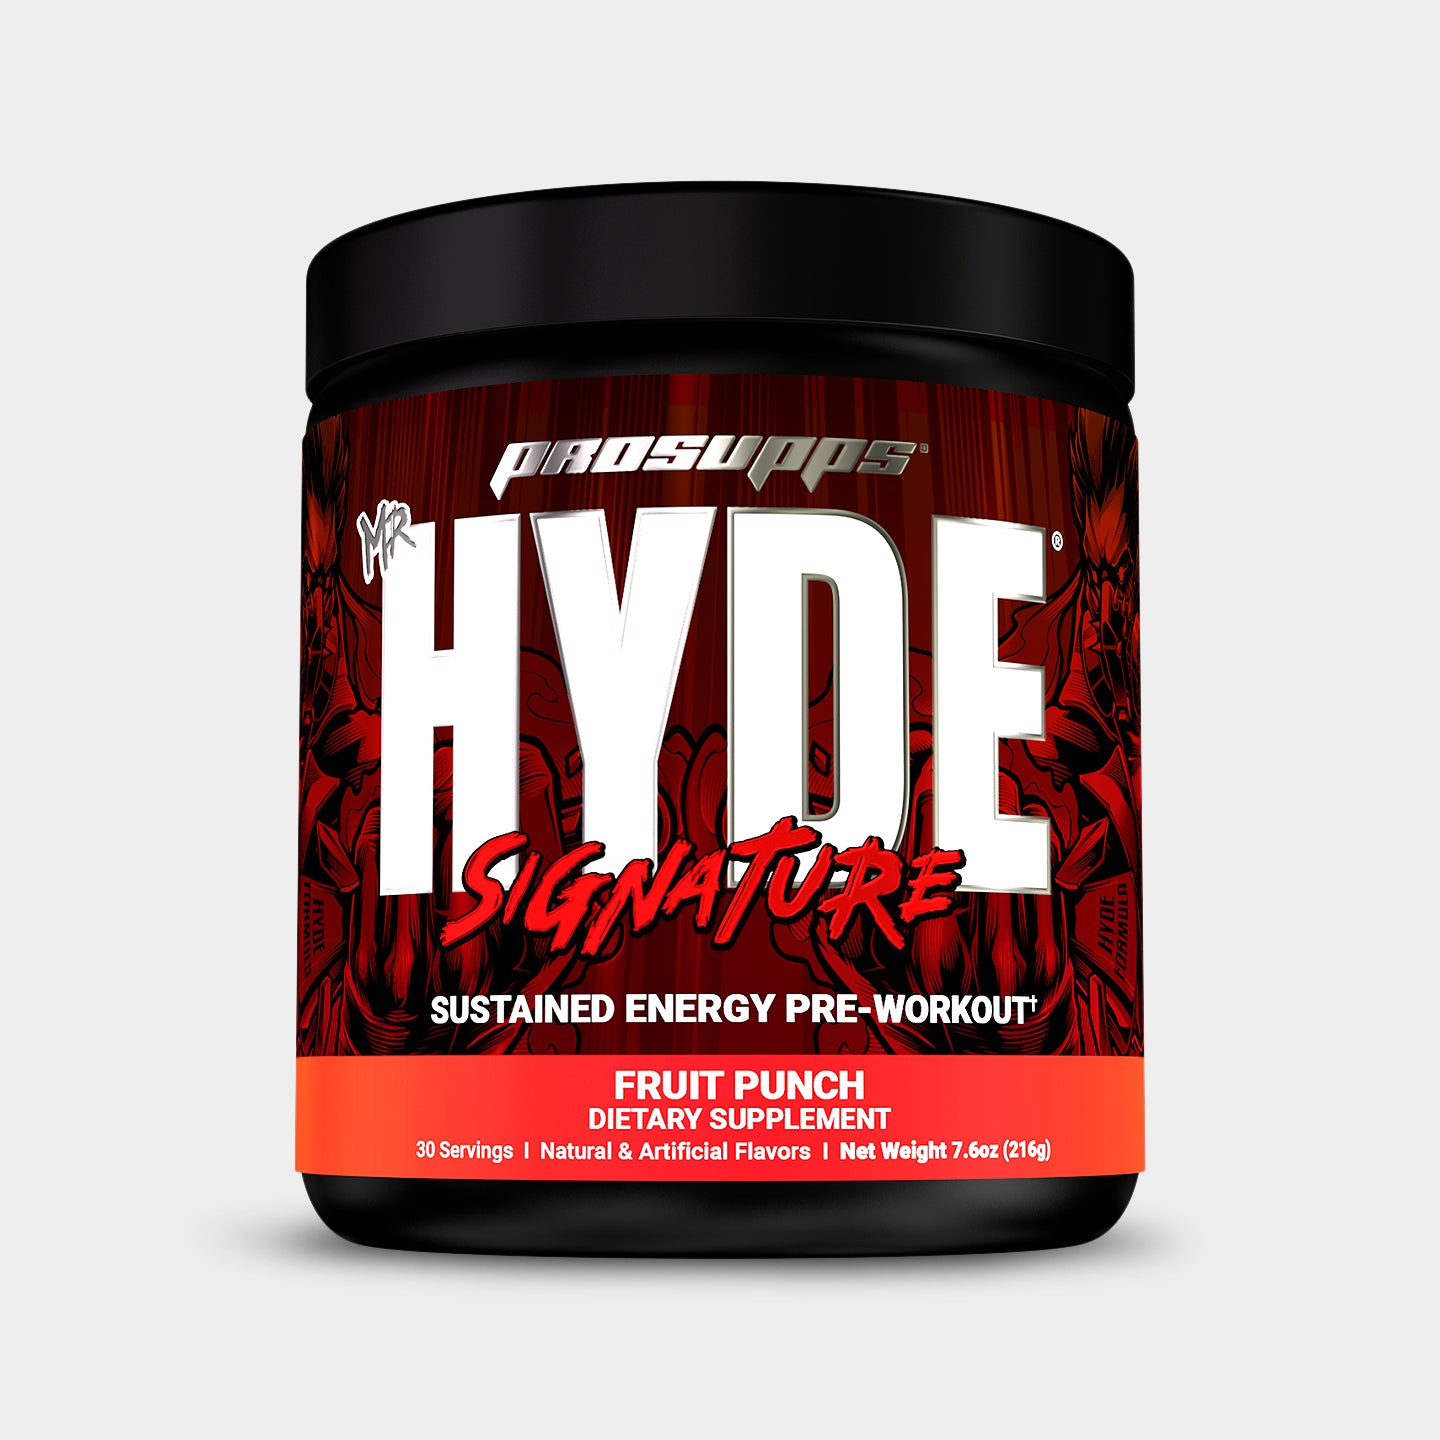 Pro Supps Mr. HYDE Signature, Fruit Punch, 30 Servings A1